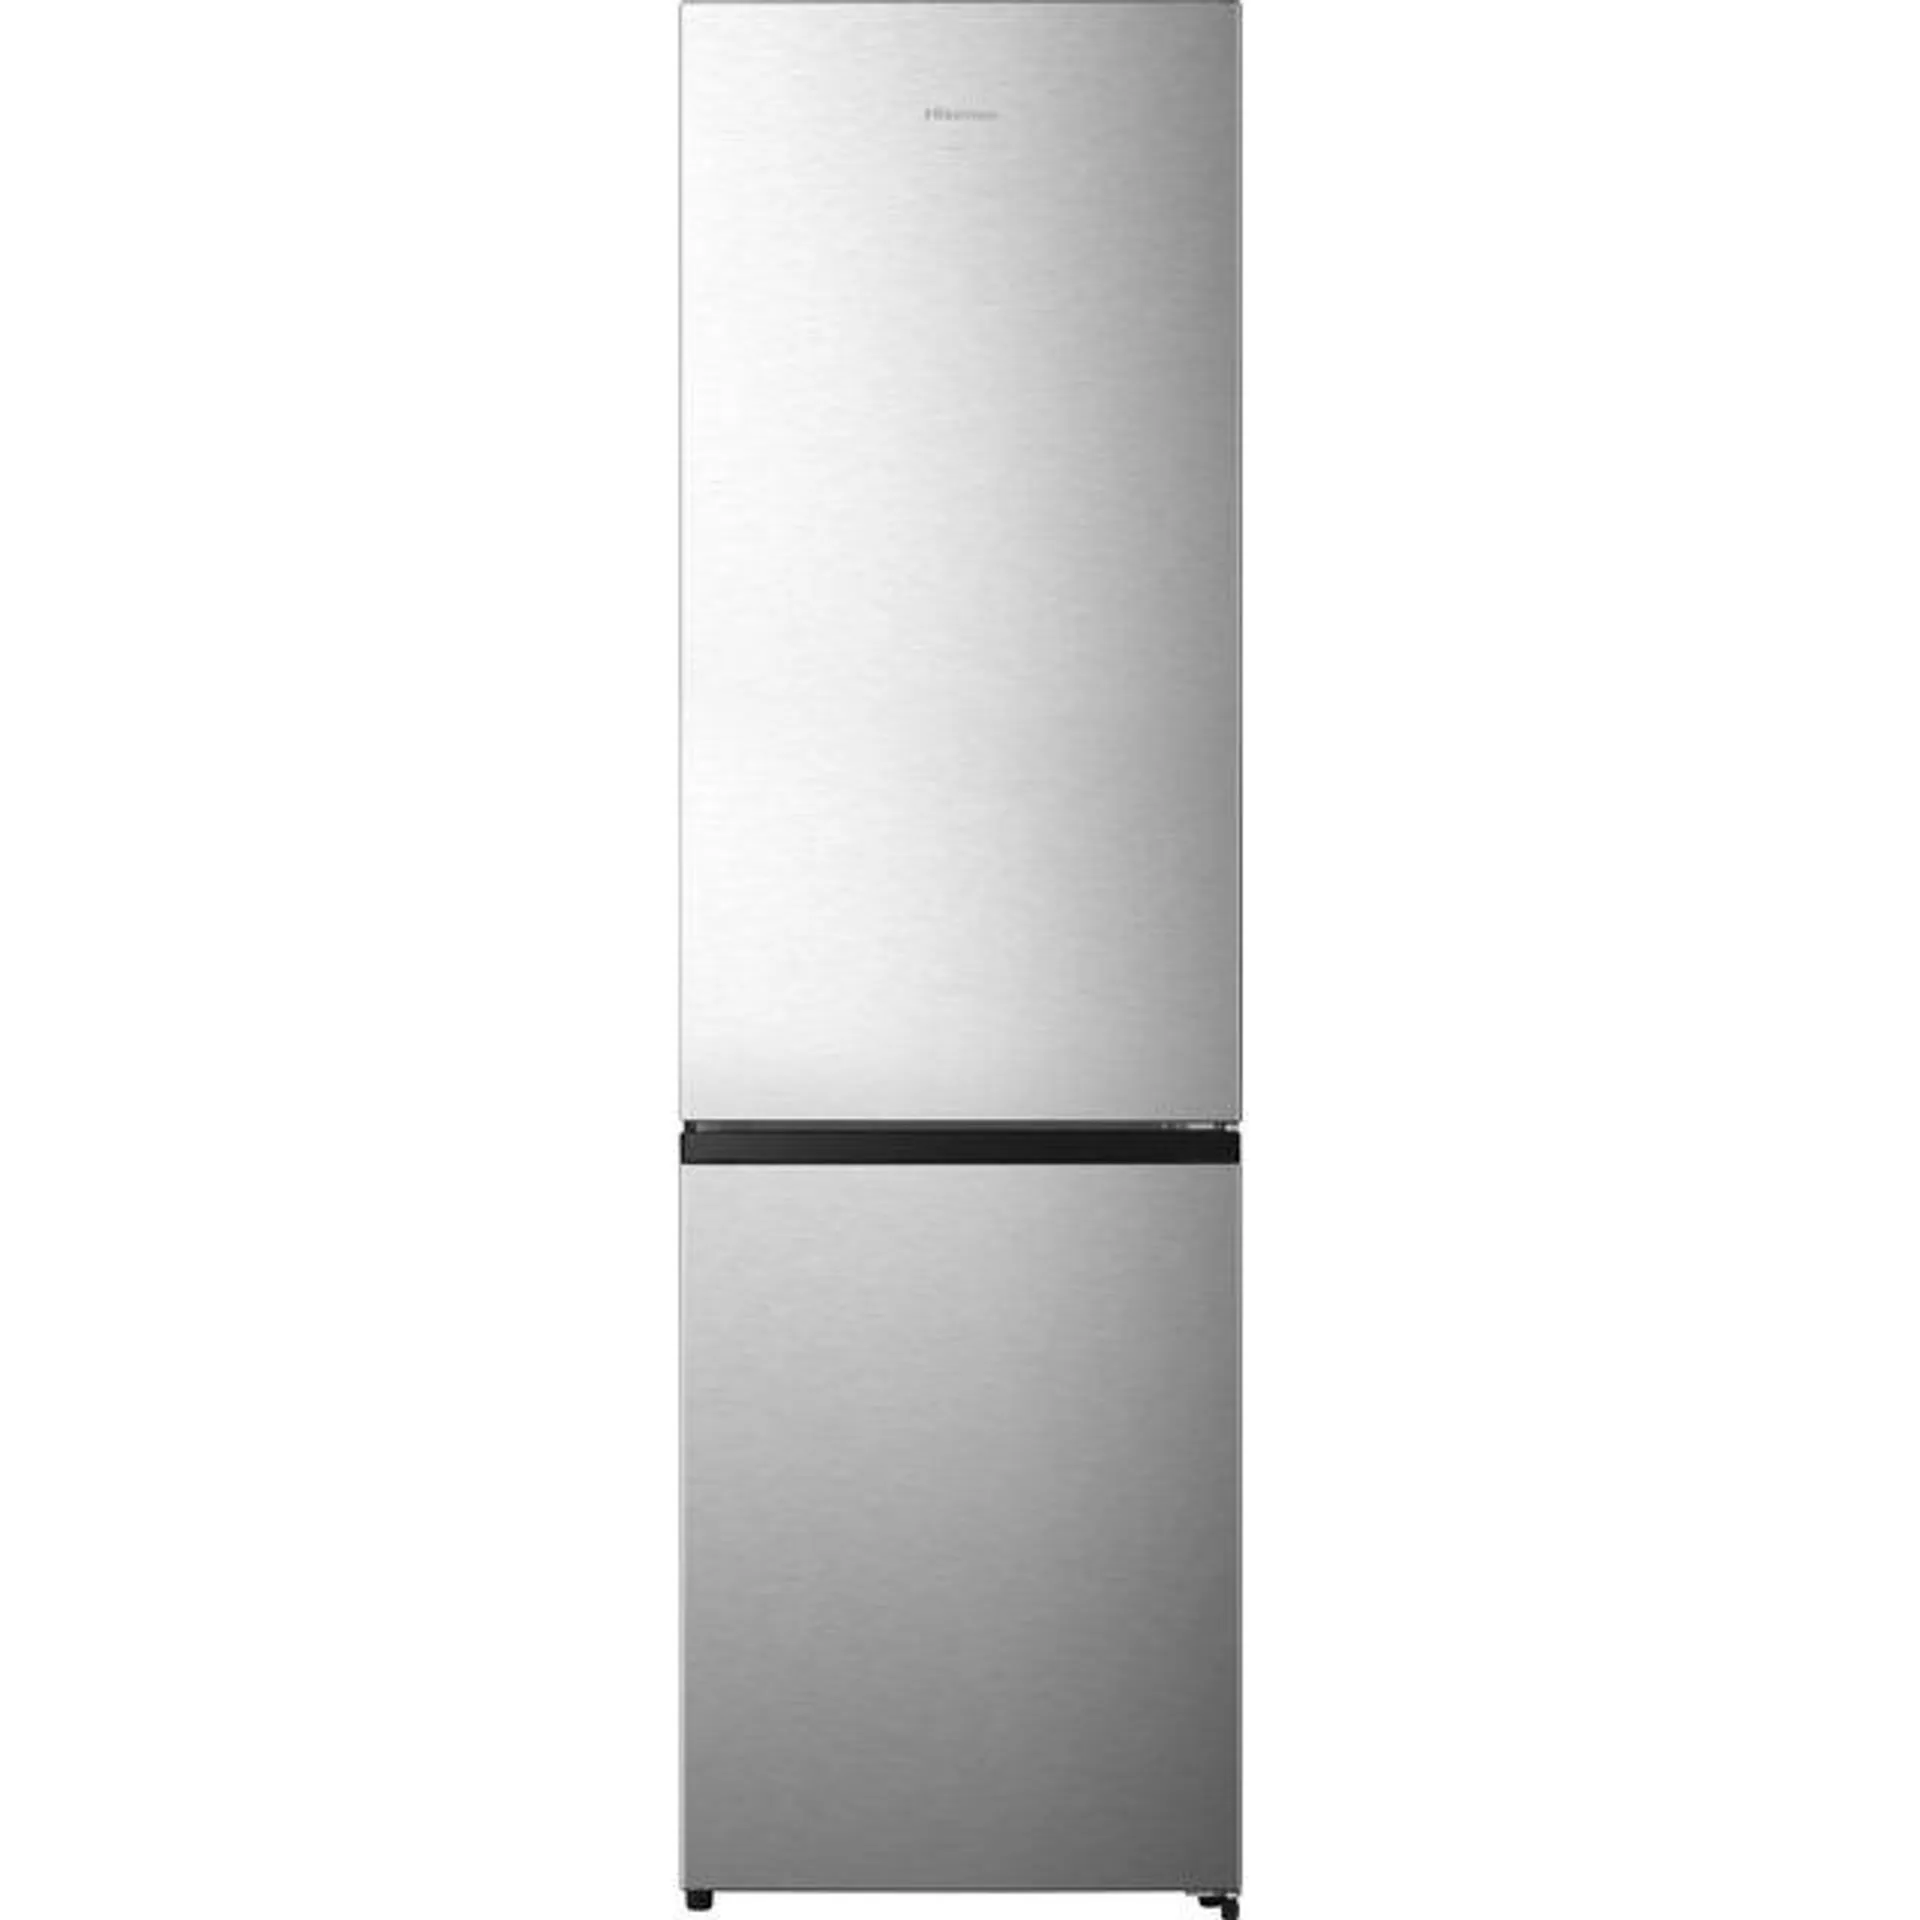 Hisense RB435N4BCE 70/30 Total No Frost Fridge Freezer - Stainless Steel - E Rated